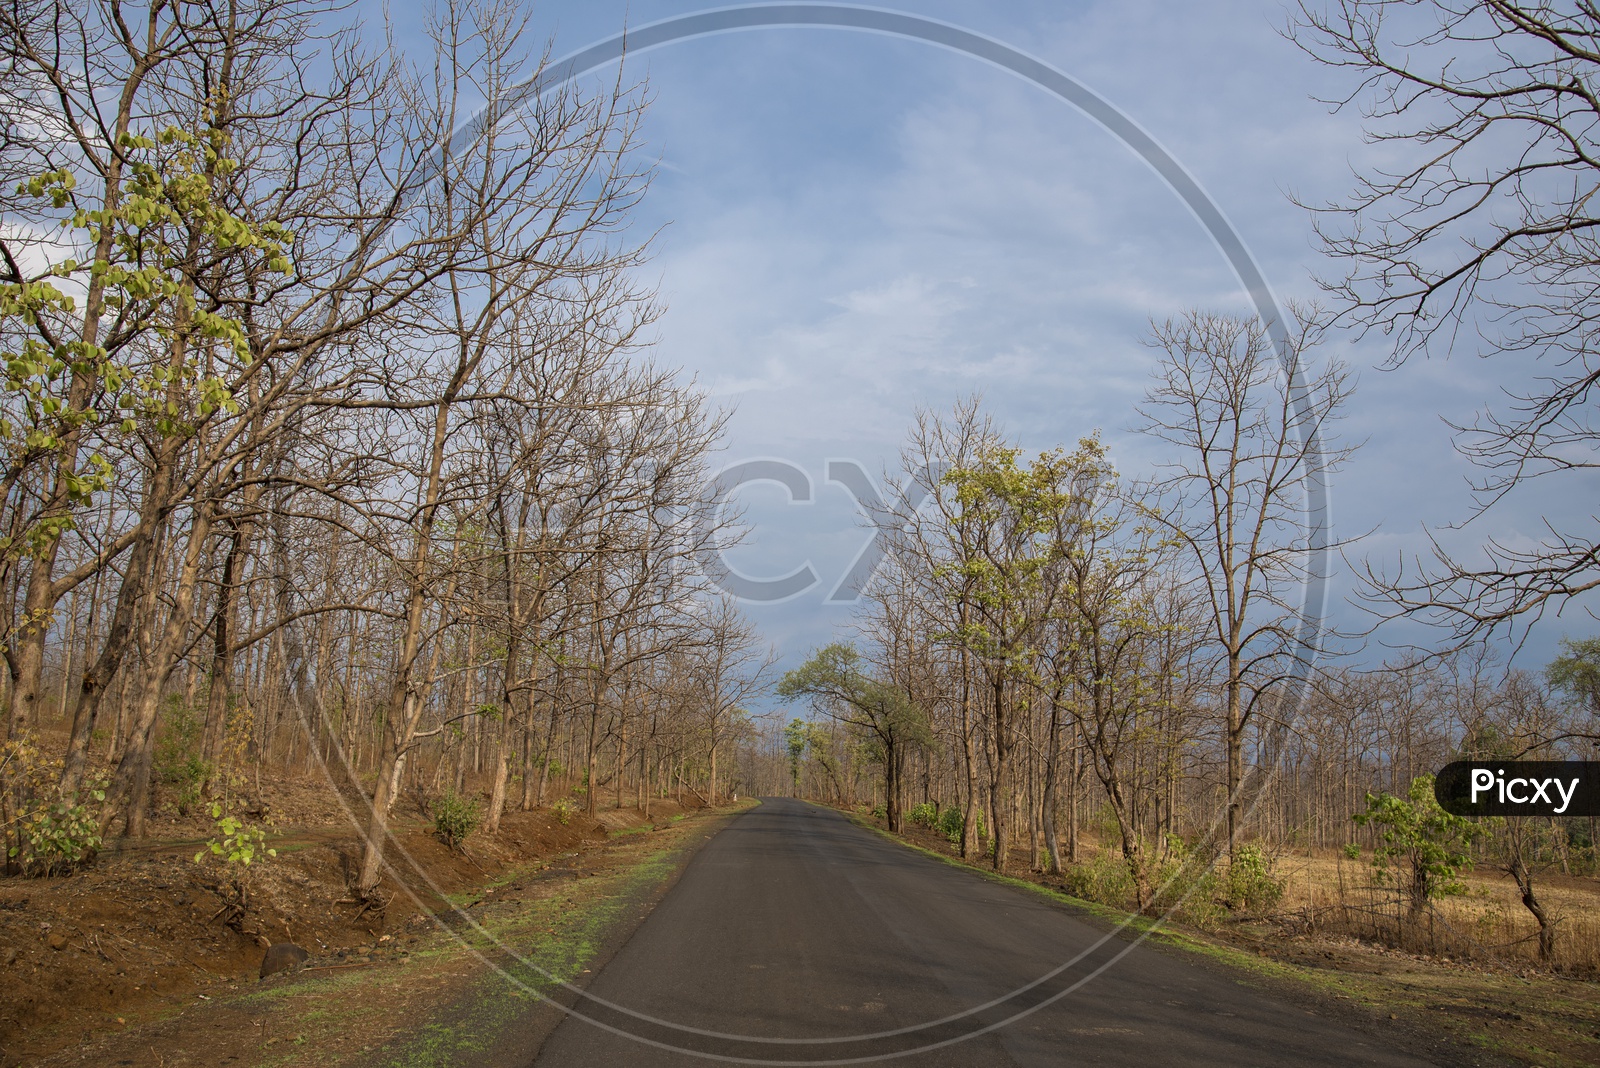 Roads In Melghat Tiger Reserve With Dried Leafless Trees on Both Sides